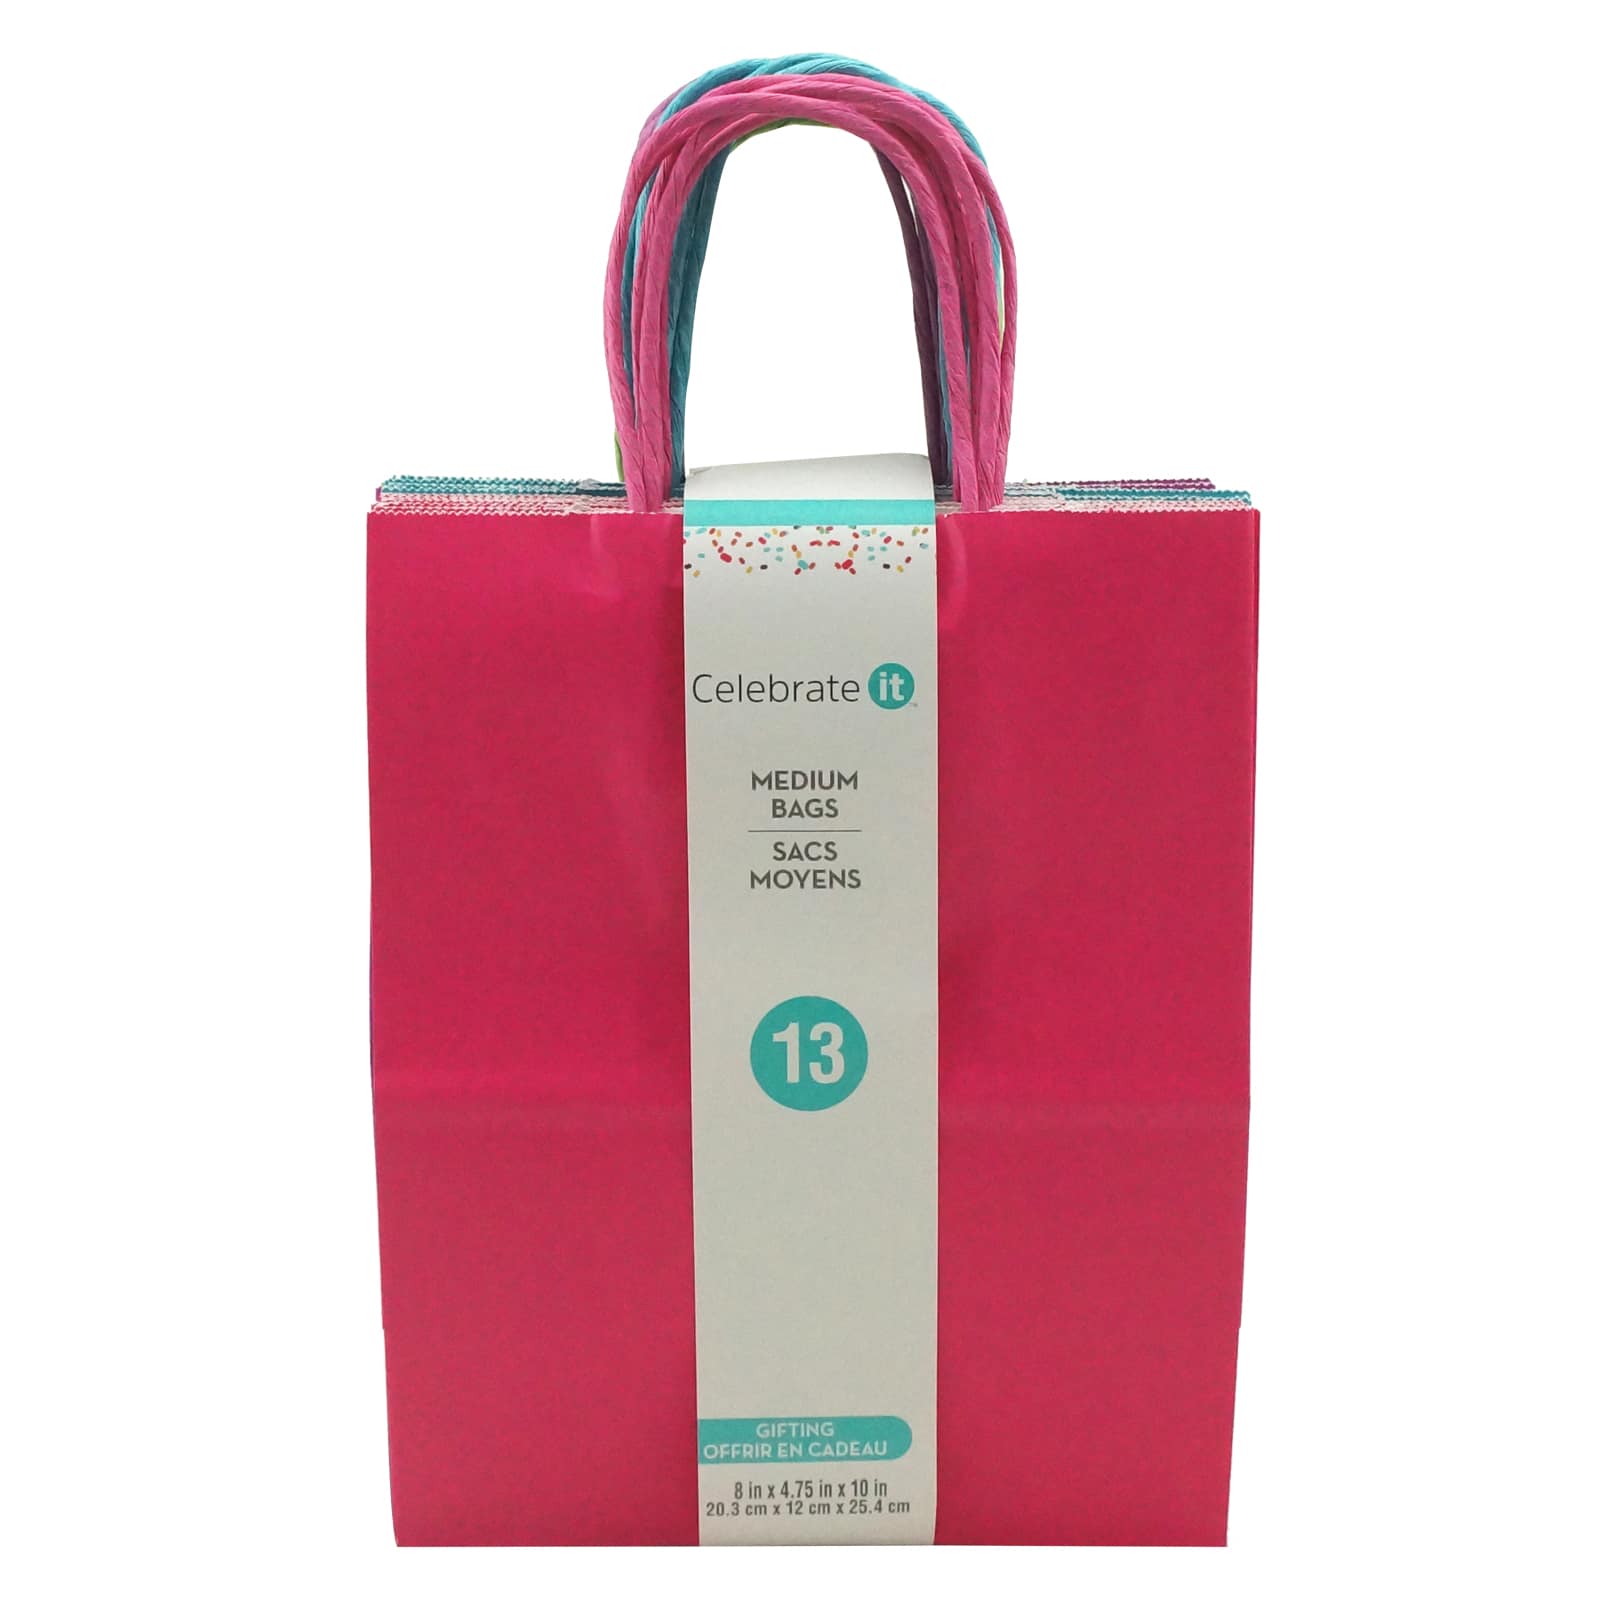 Buy the Small Pink Gift Bag Value Pack By Celebrate It™ at Michaels